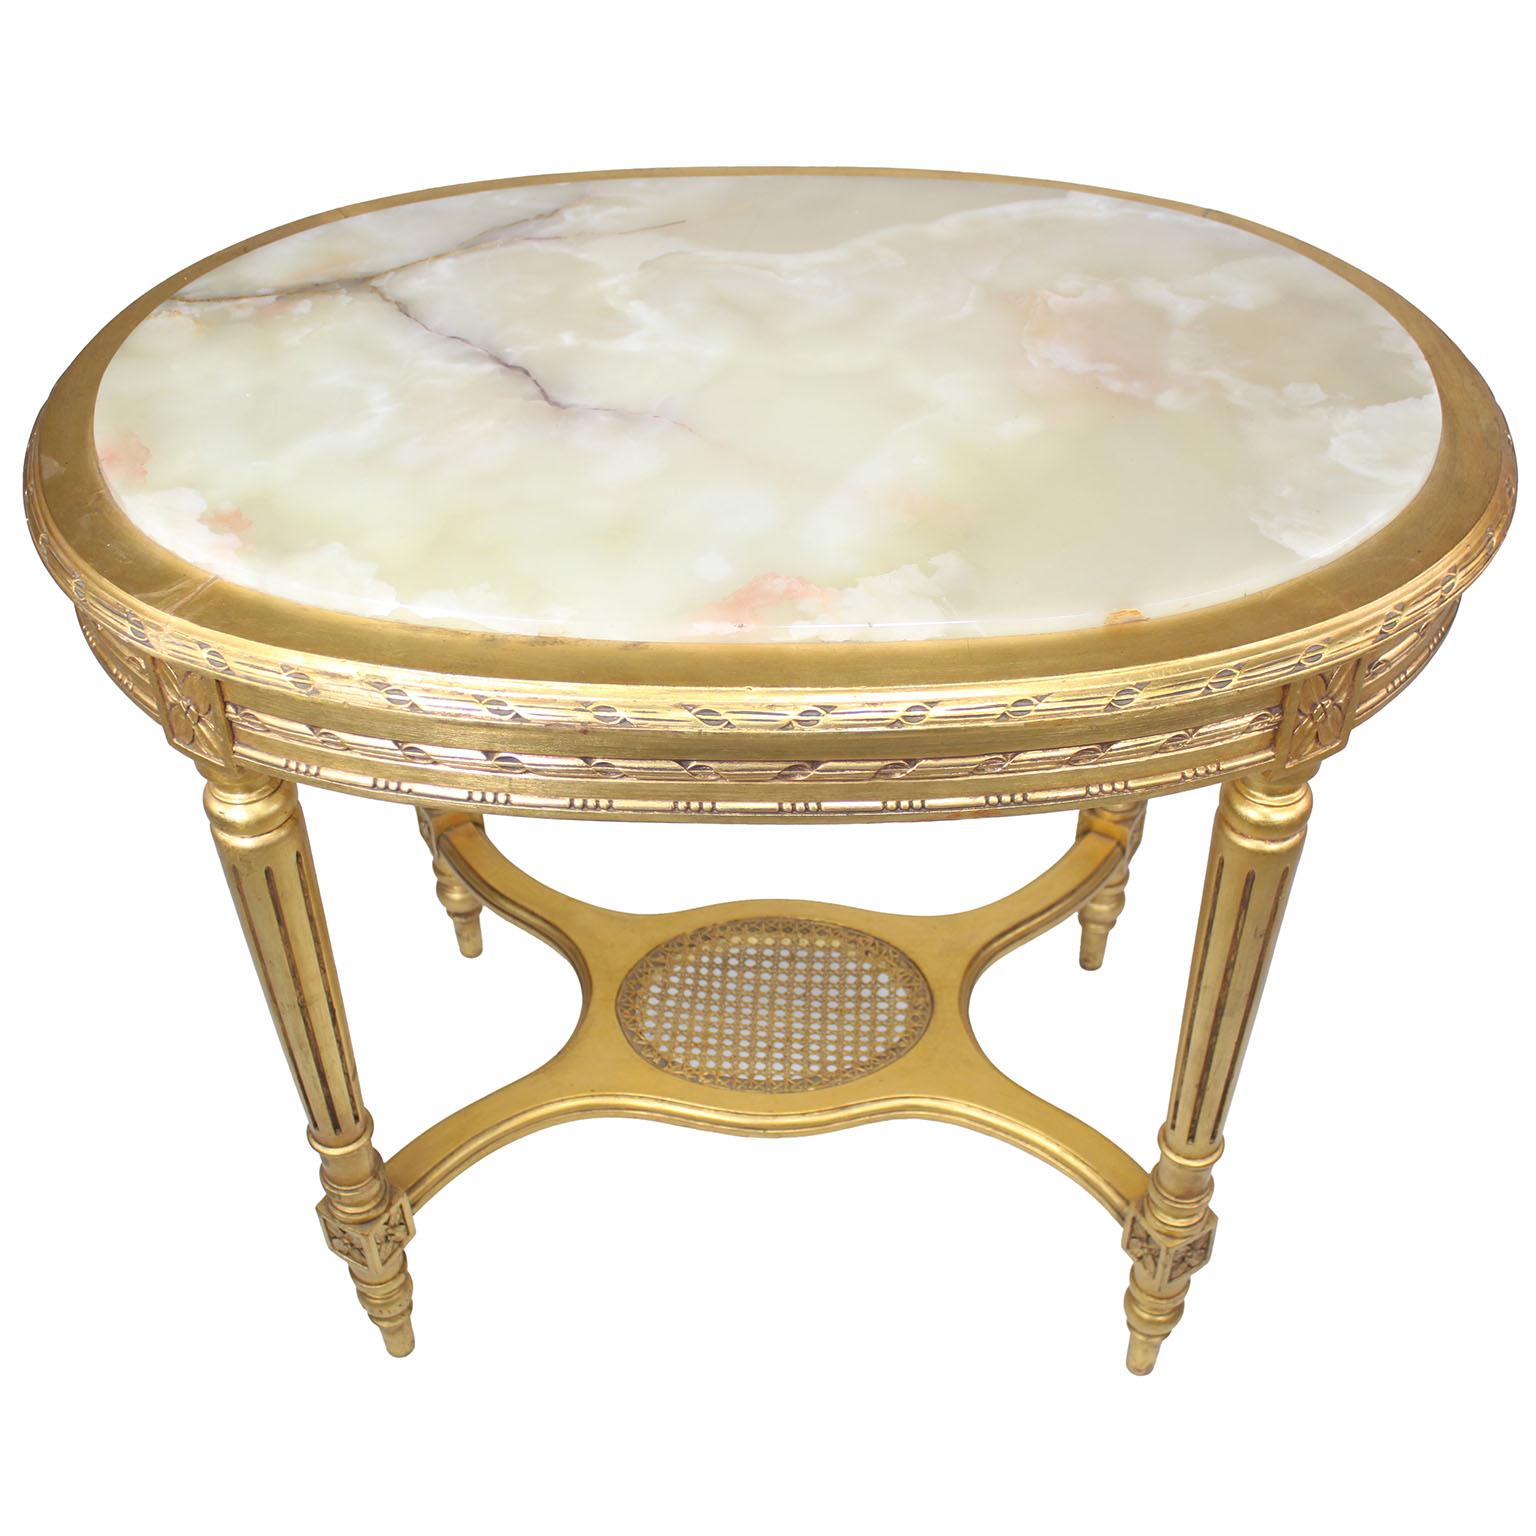 Hand-Carved French Louis XVI Style Belle Époque Oval Giltwood Carved Center Table w/Onyx Top For Sale